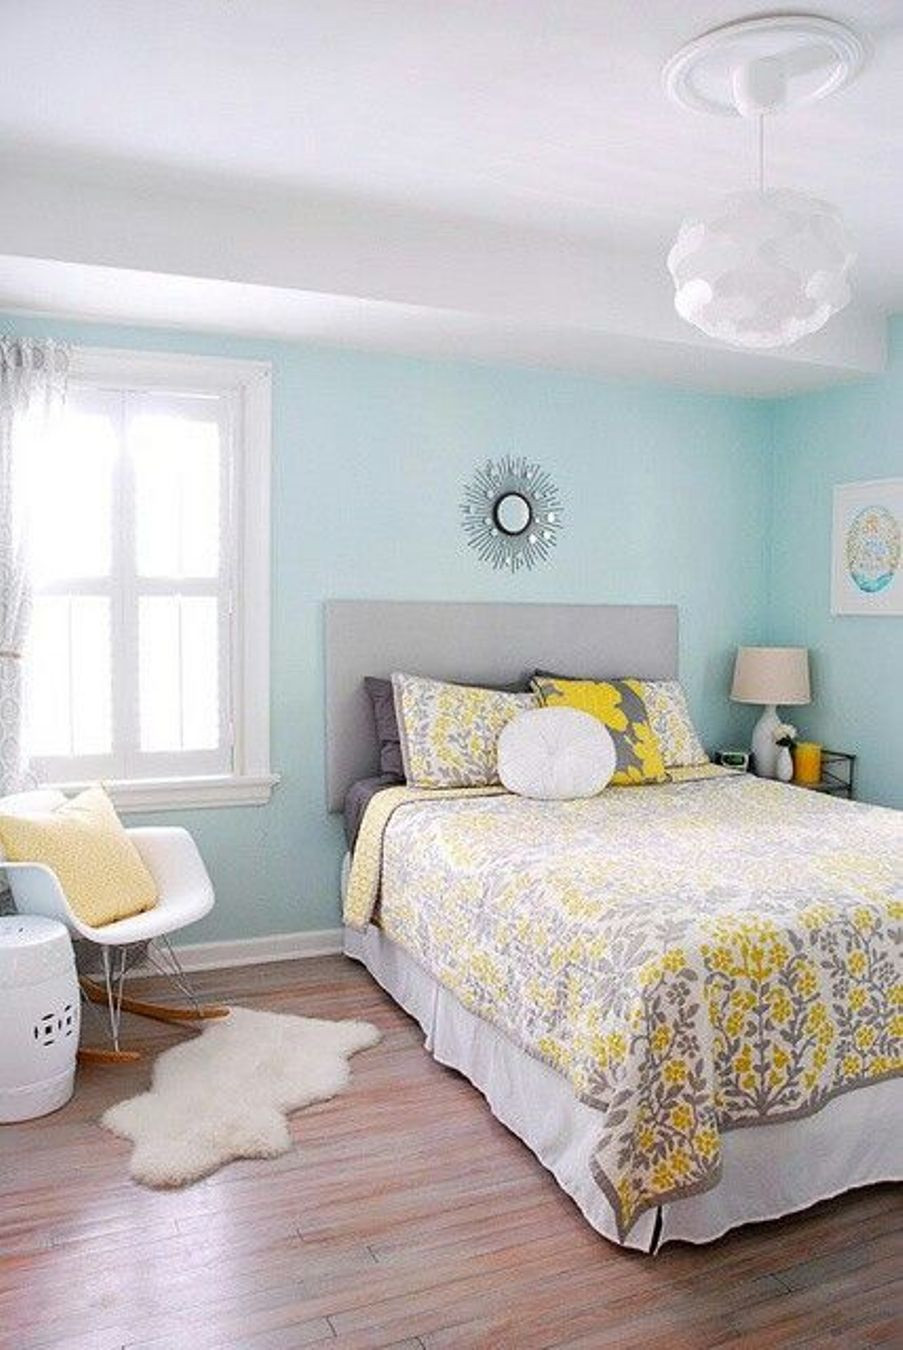 Small Bedroom Paint Ideas Pictures
 Best Paint Colors for Small Room – Some Tips – HomesFeed